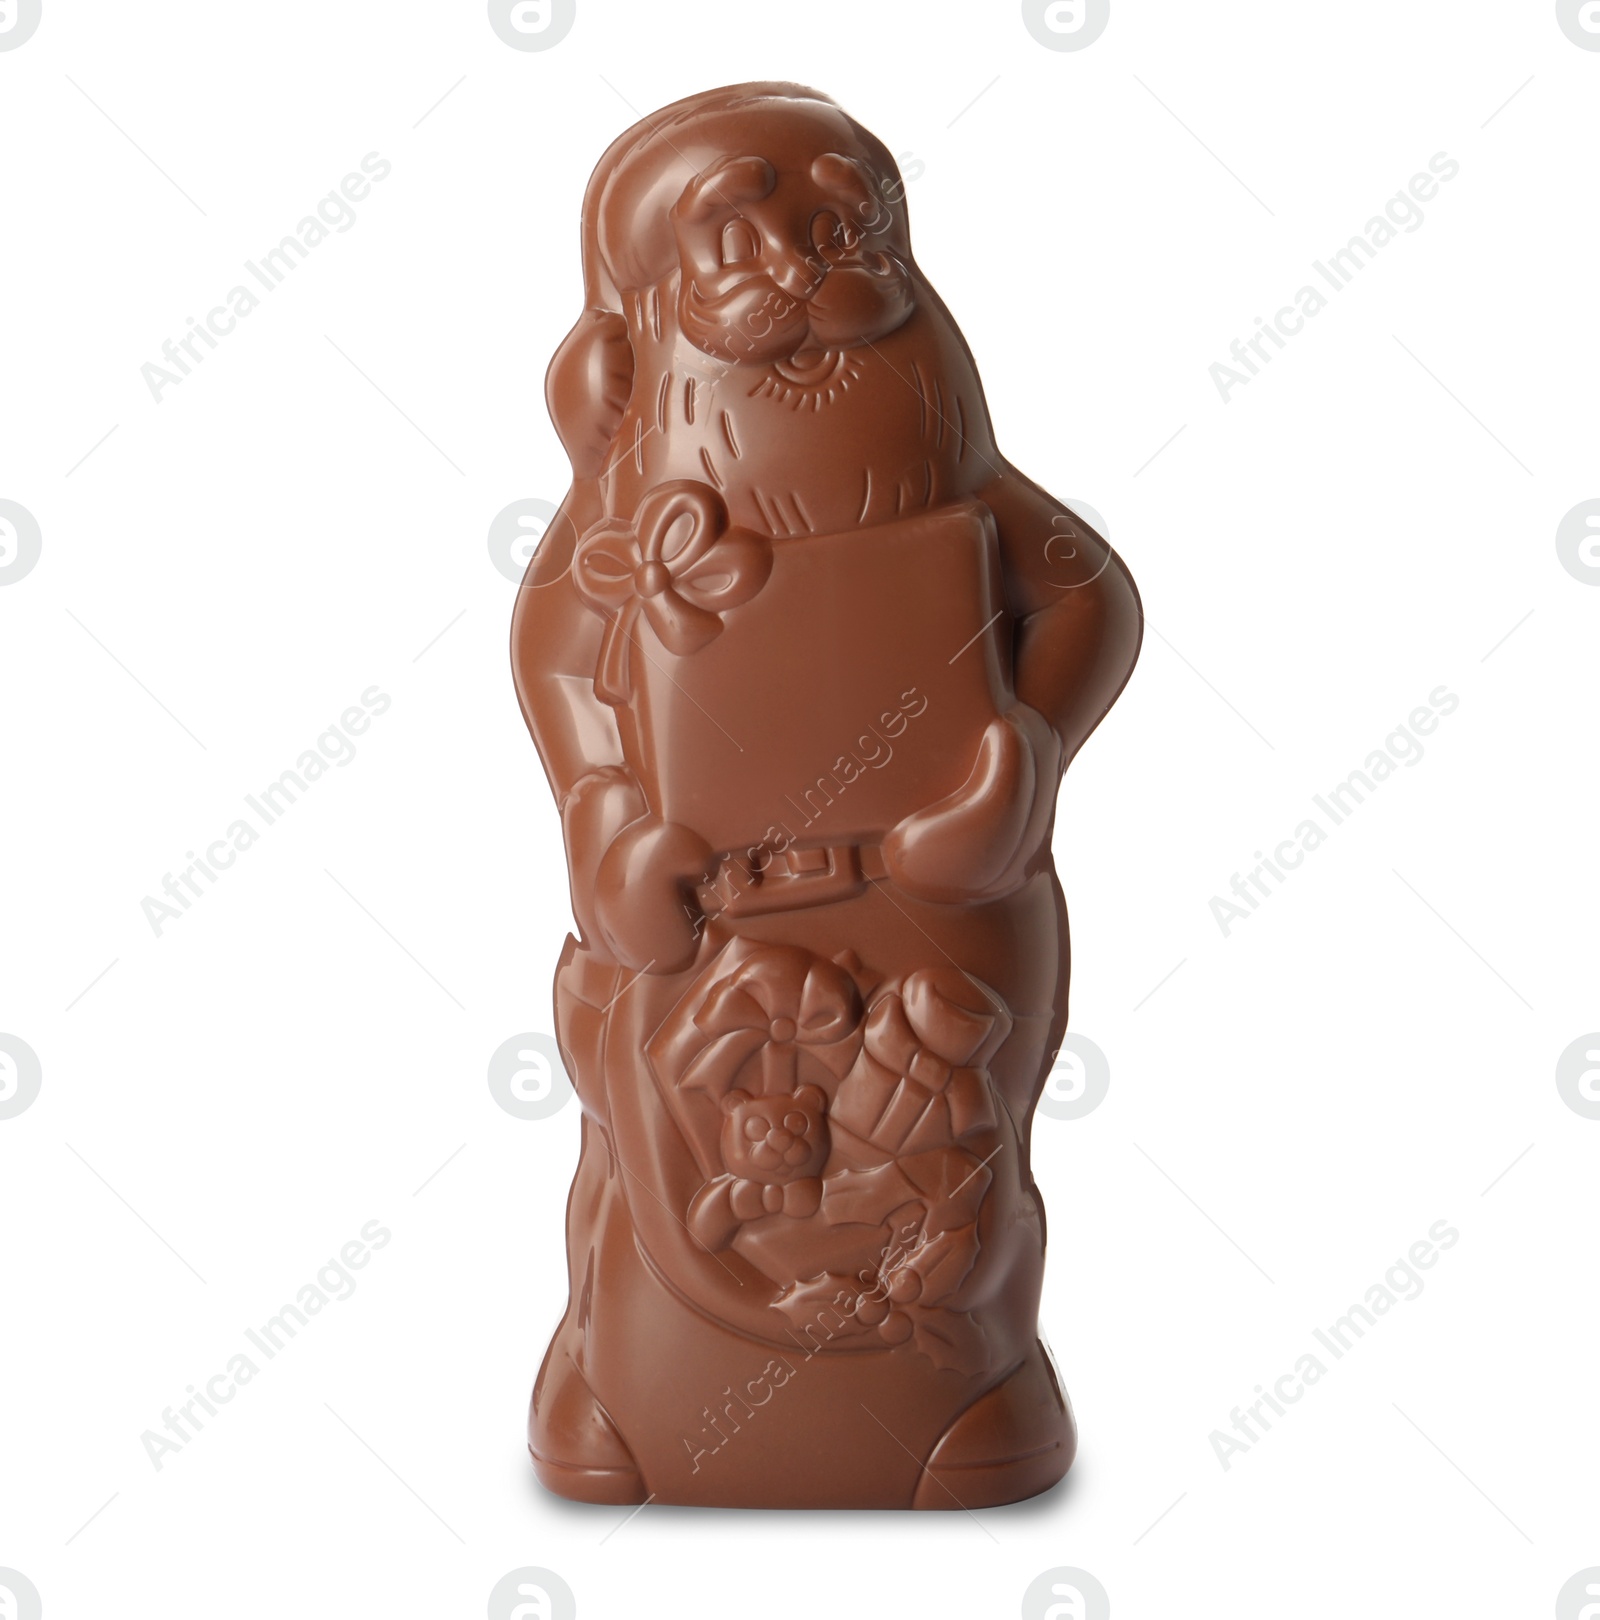 Photo of Unwrapped chocolate Santa Claus isolated on white